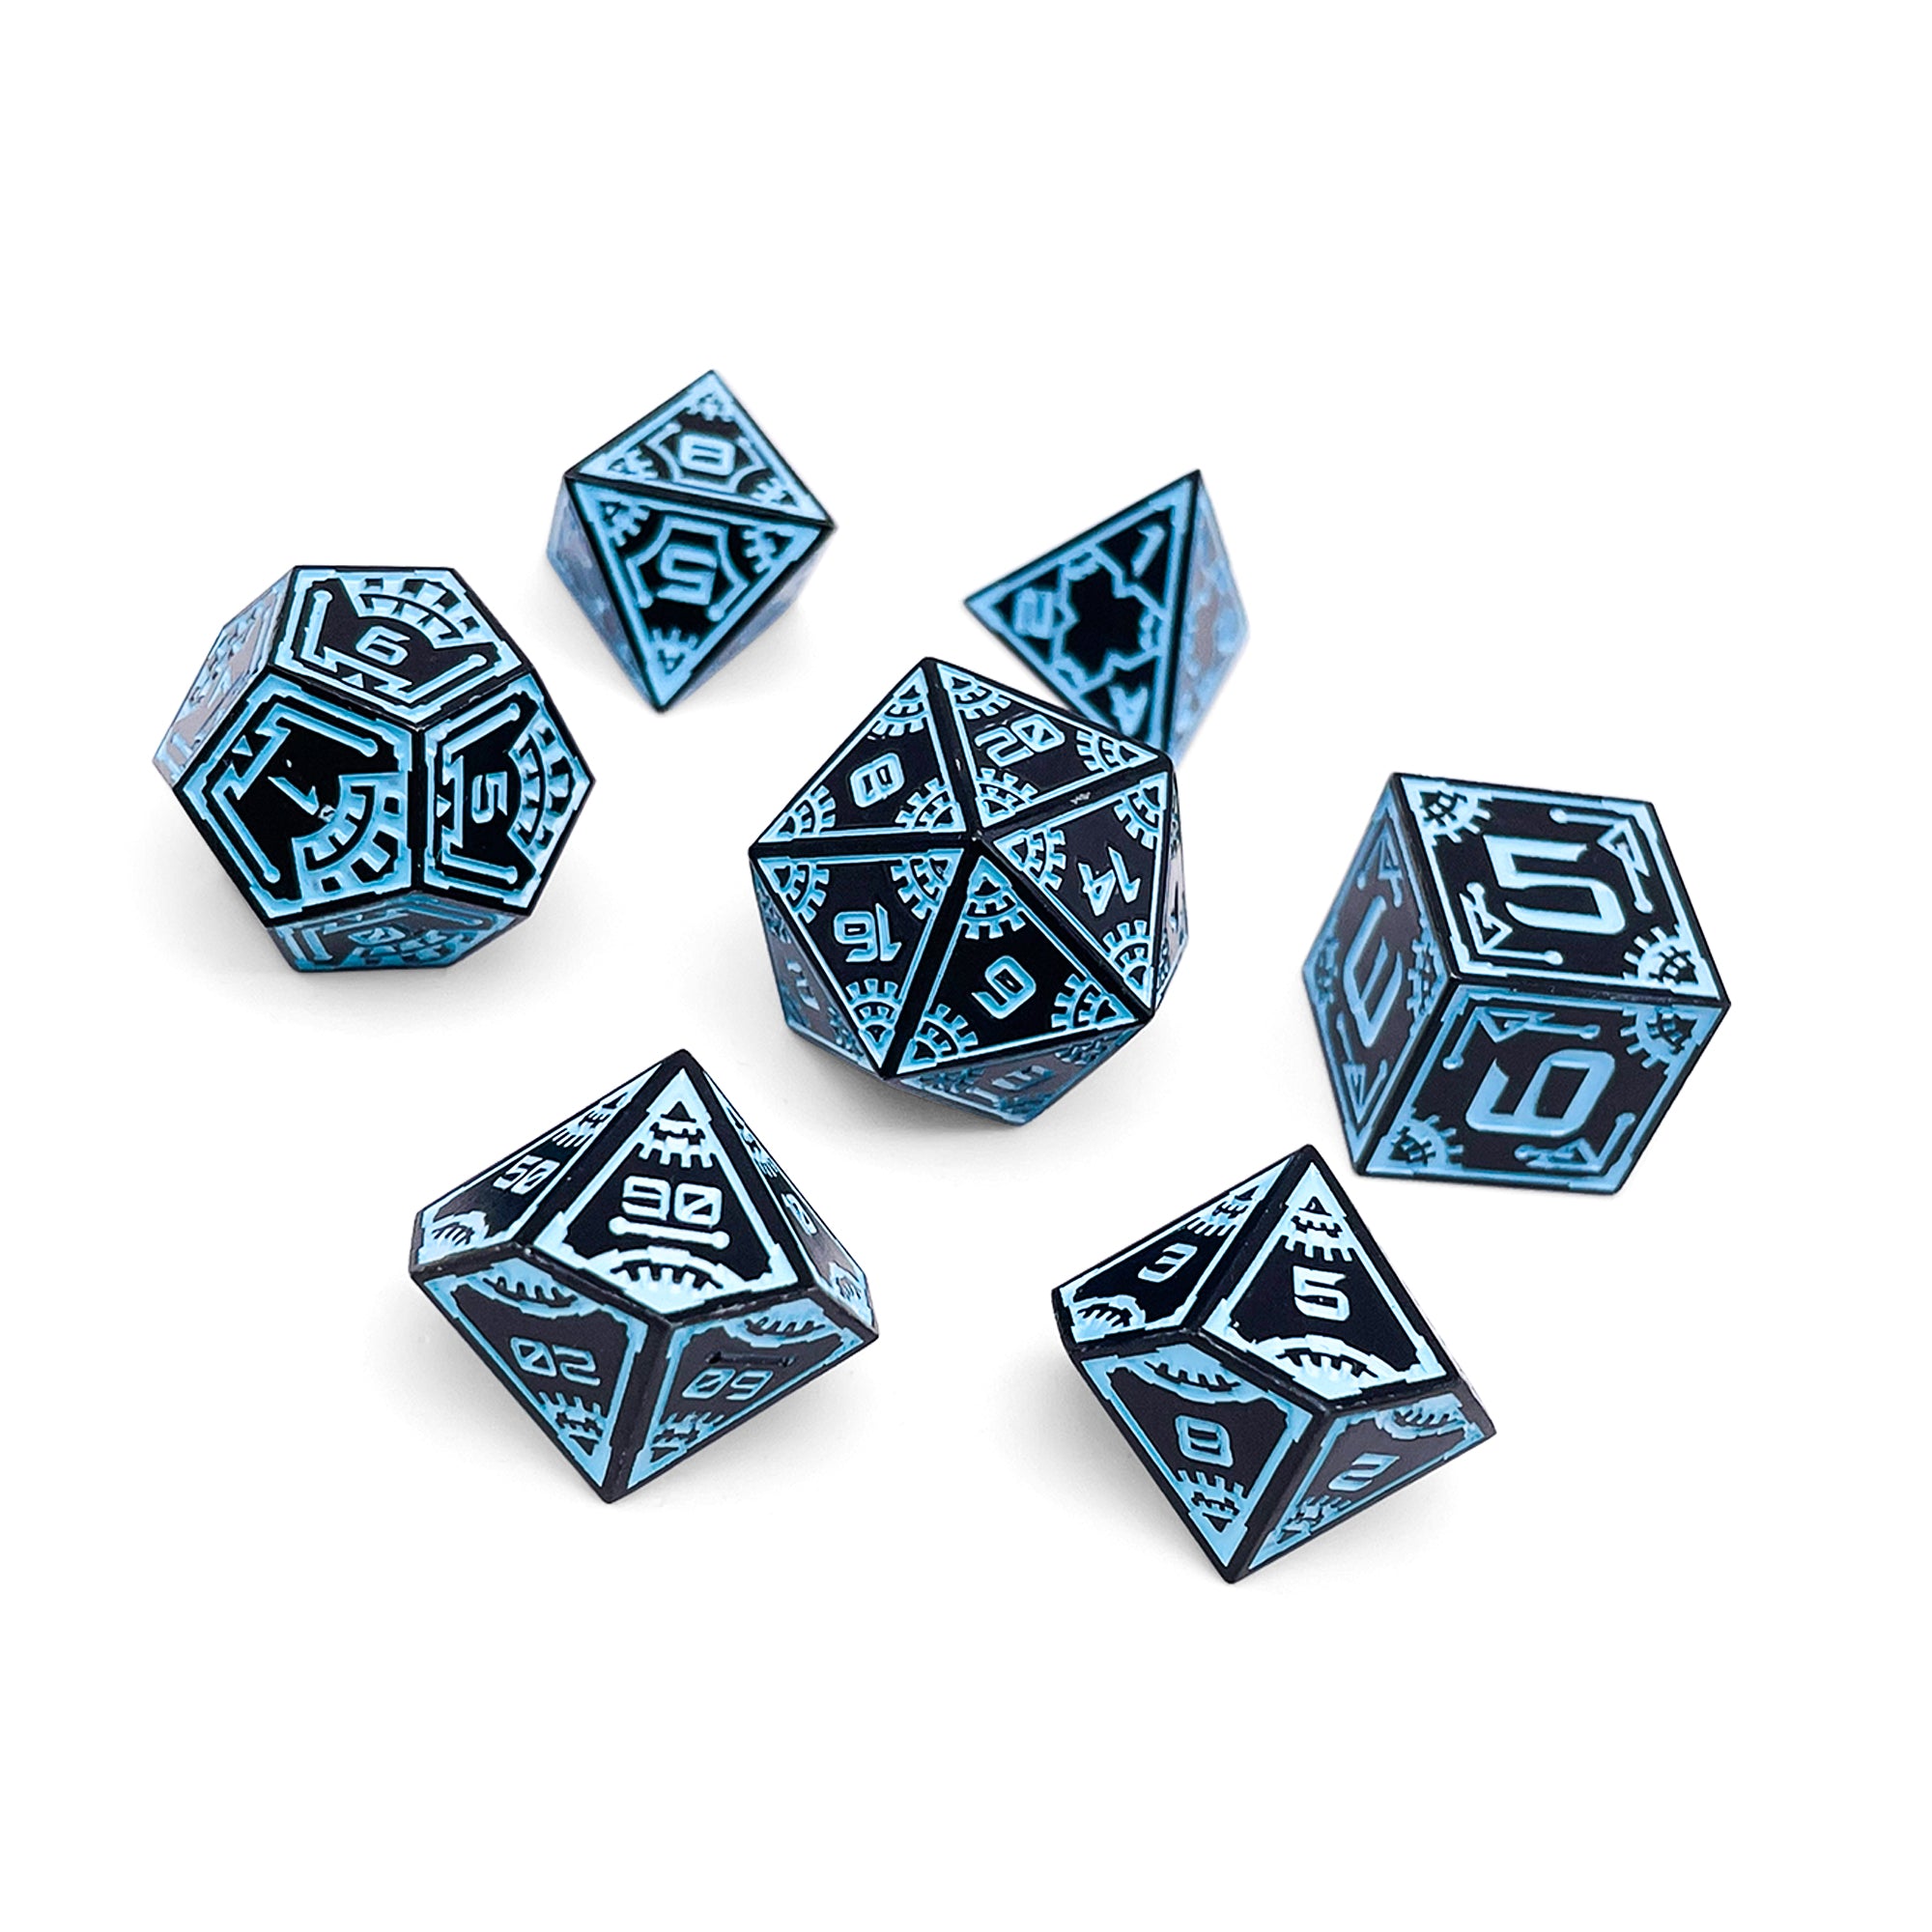 Force Field - Space Dice 7 Piece RPG Set